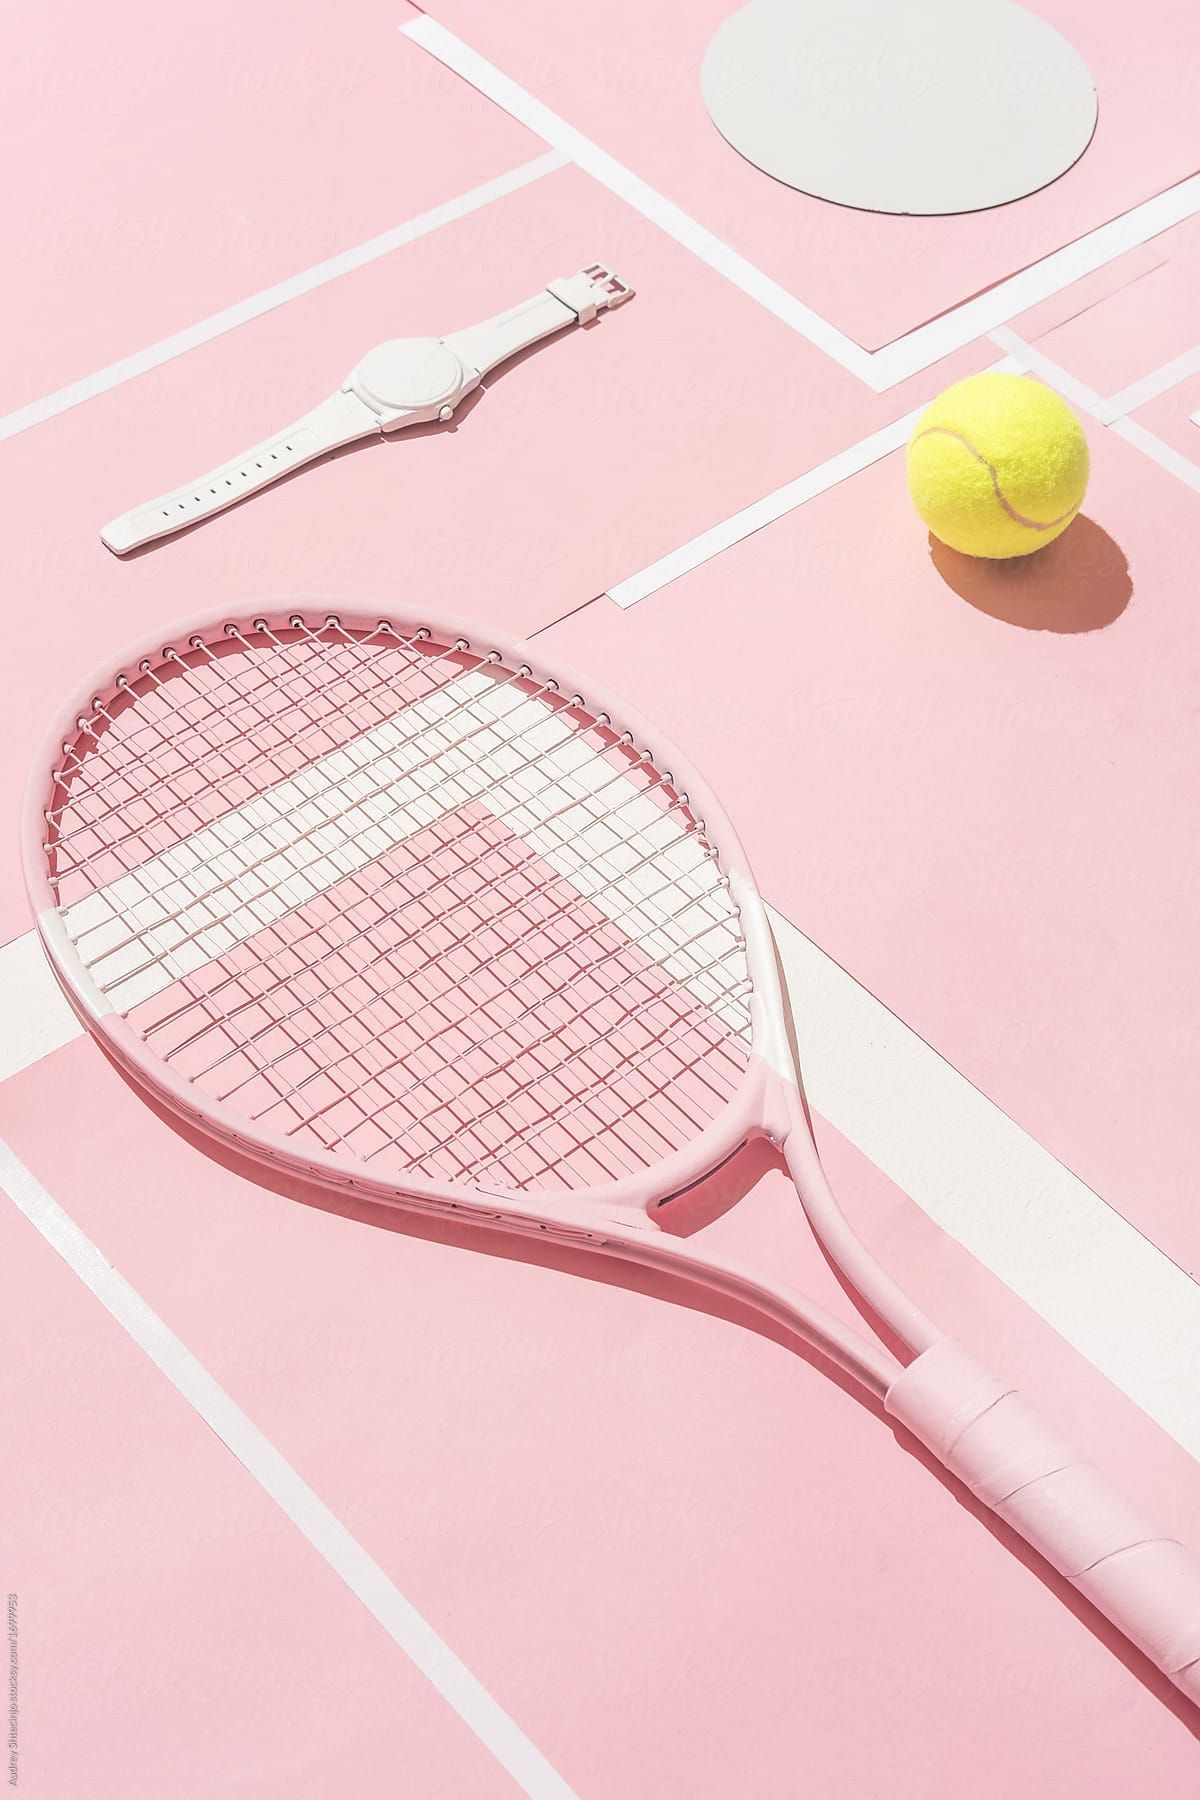 Abstract Tennis Themed Background. Tennis wallpaper, Pastel pink aesthetic, Pink aesthetic